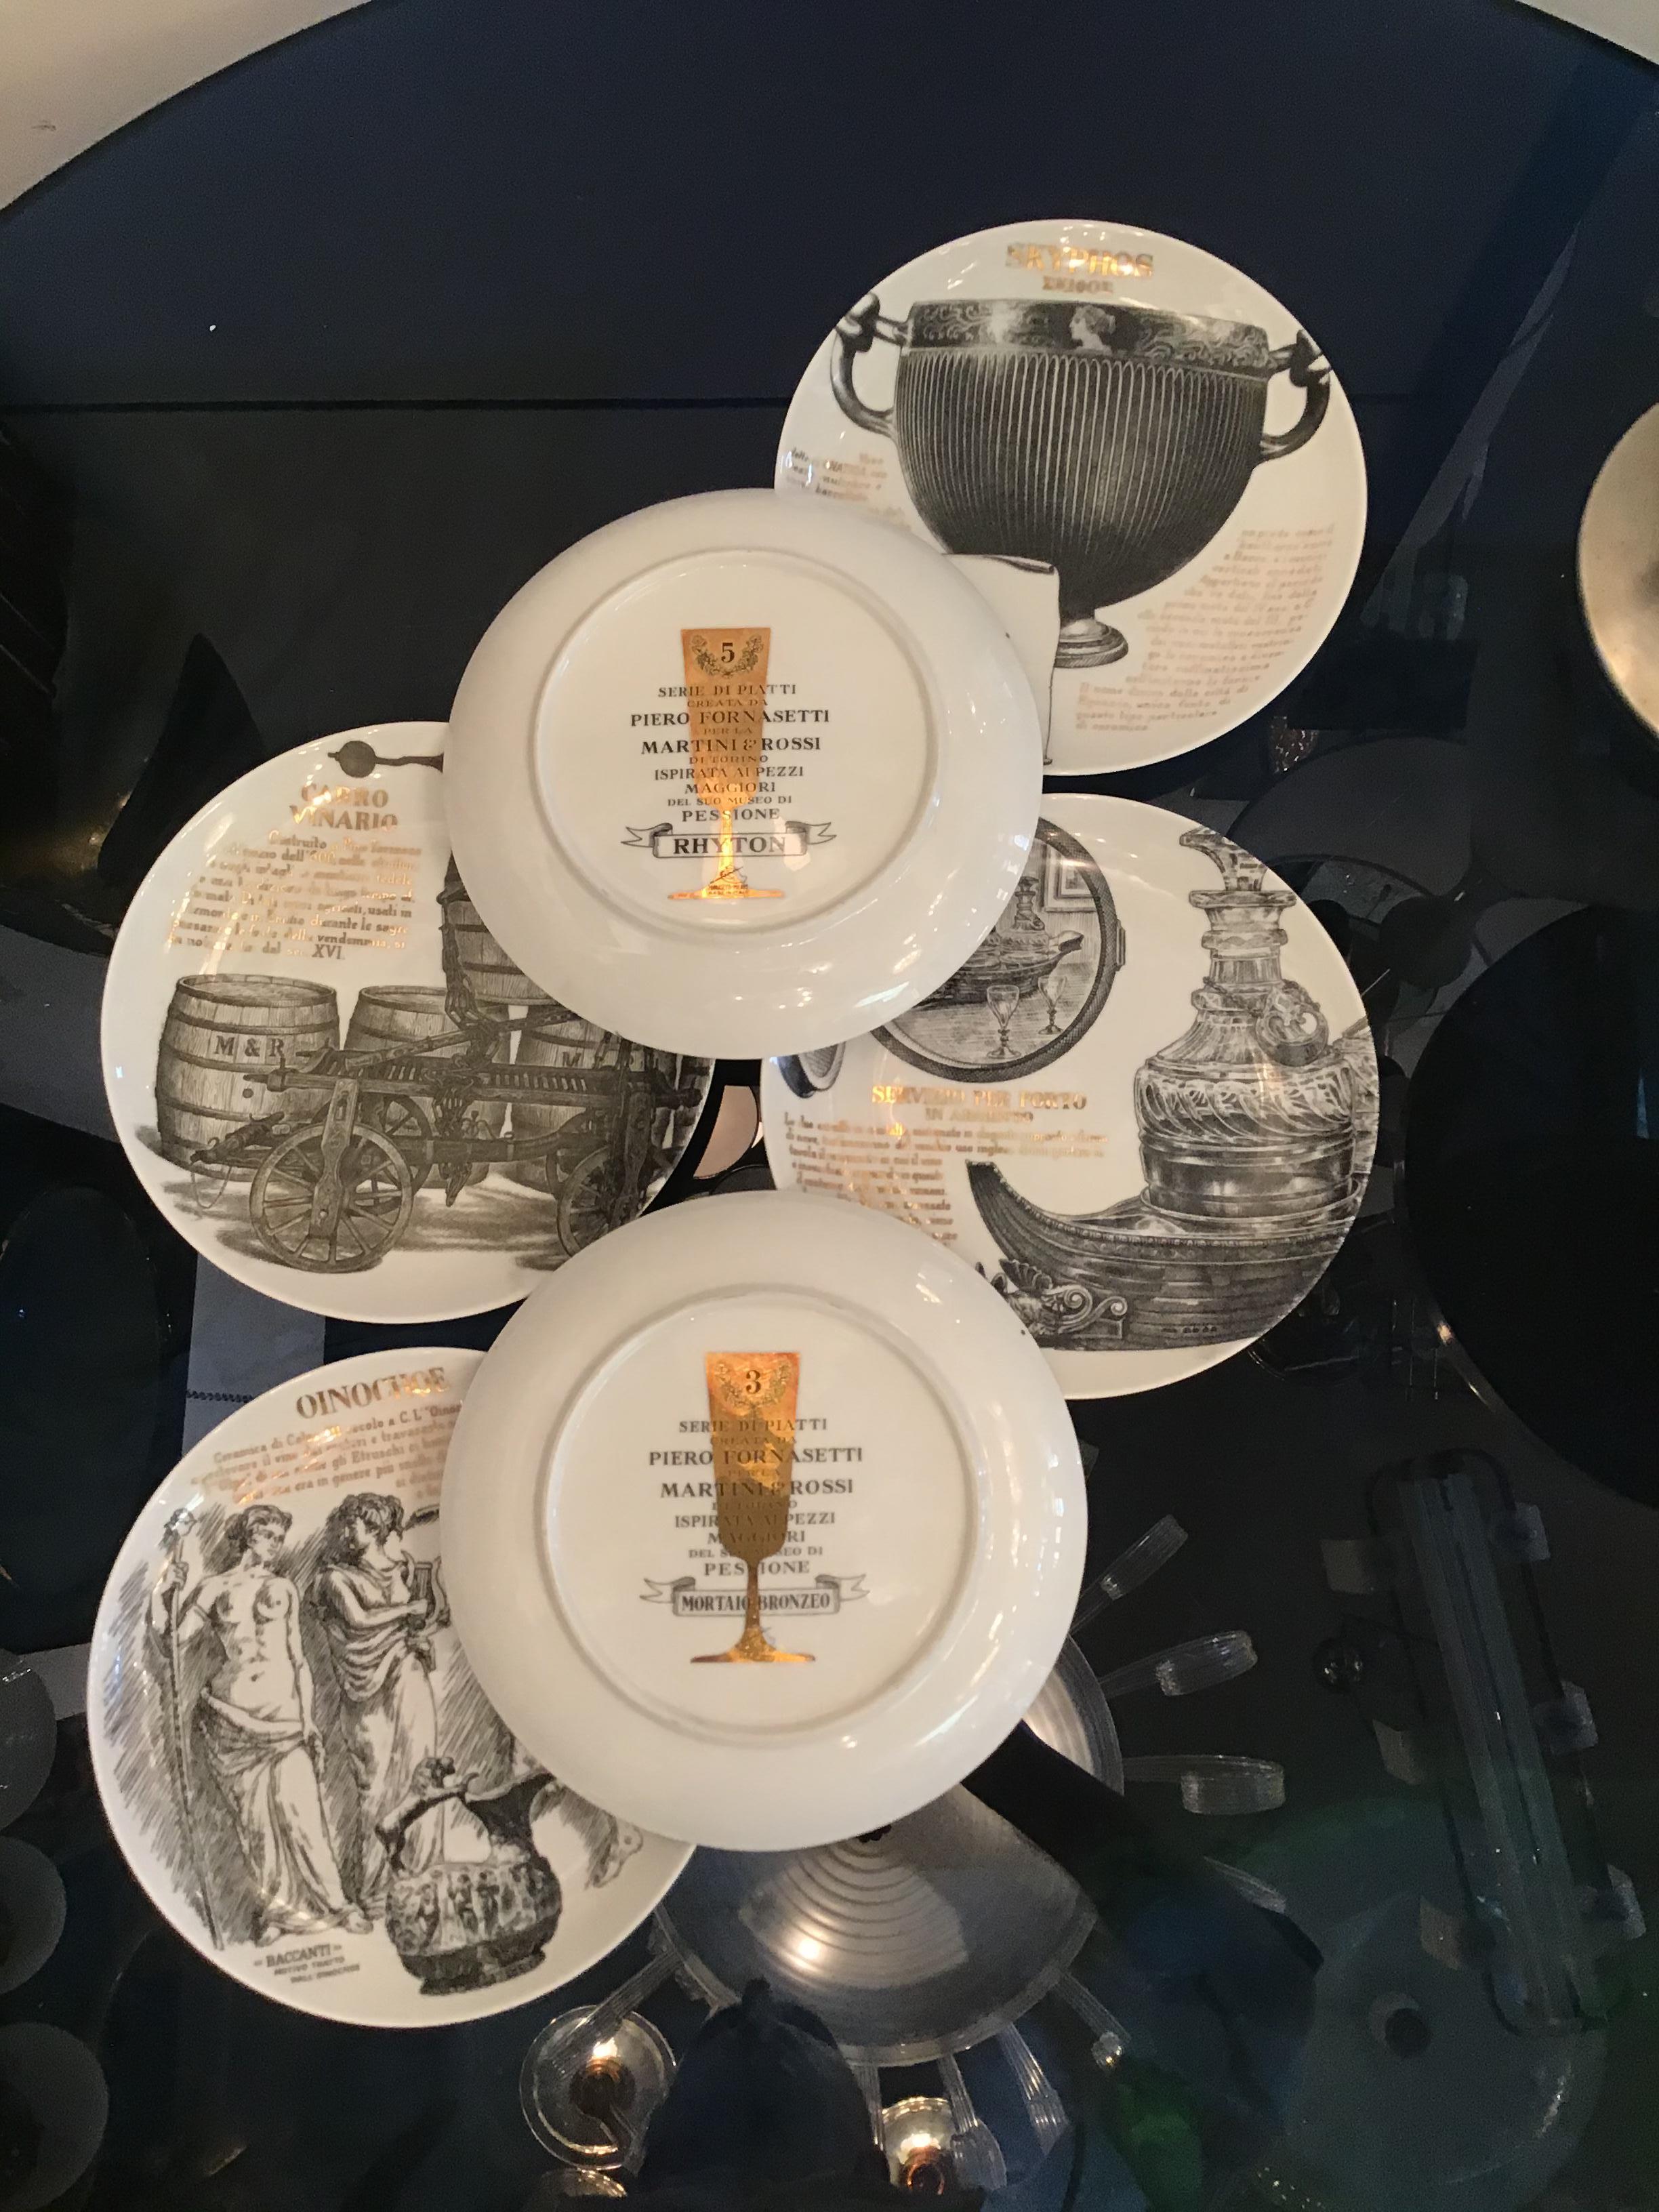 Fornasetti Set of 6 Plates for Martini and Rossi Porcelain, 1970, Italy For Sale 3